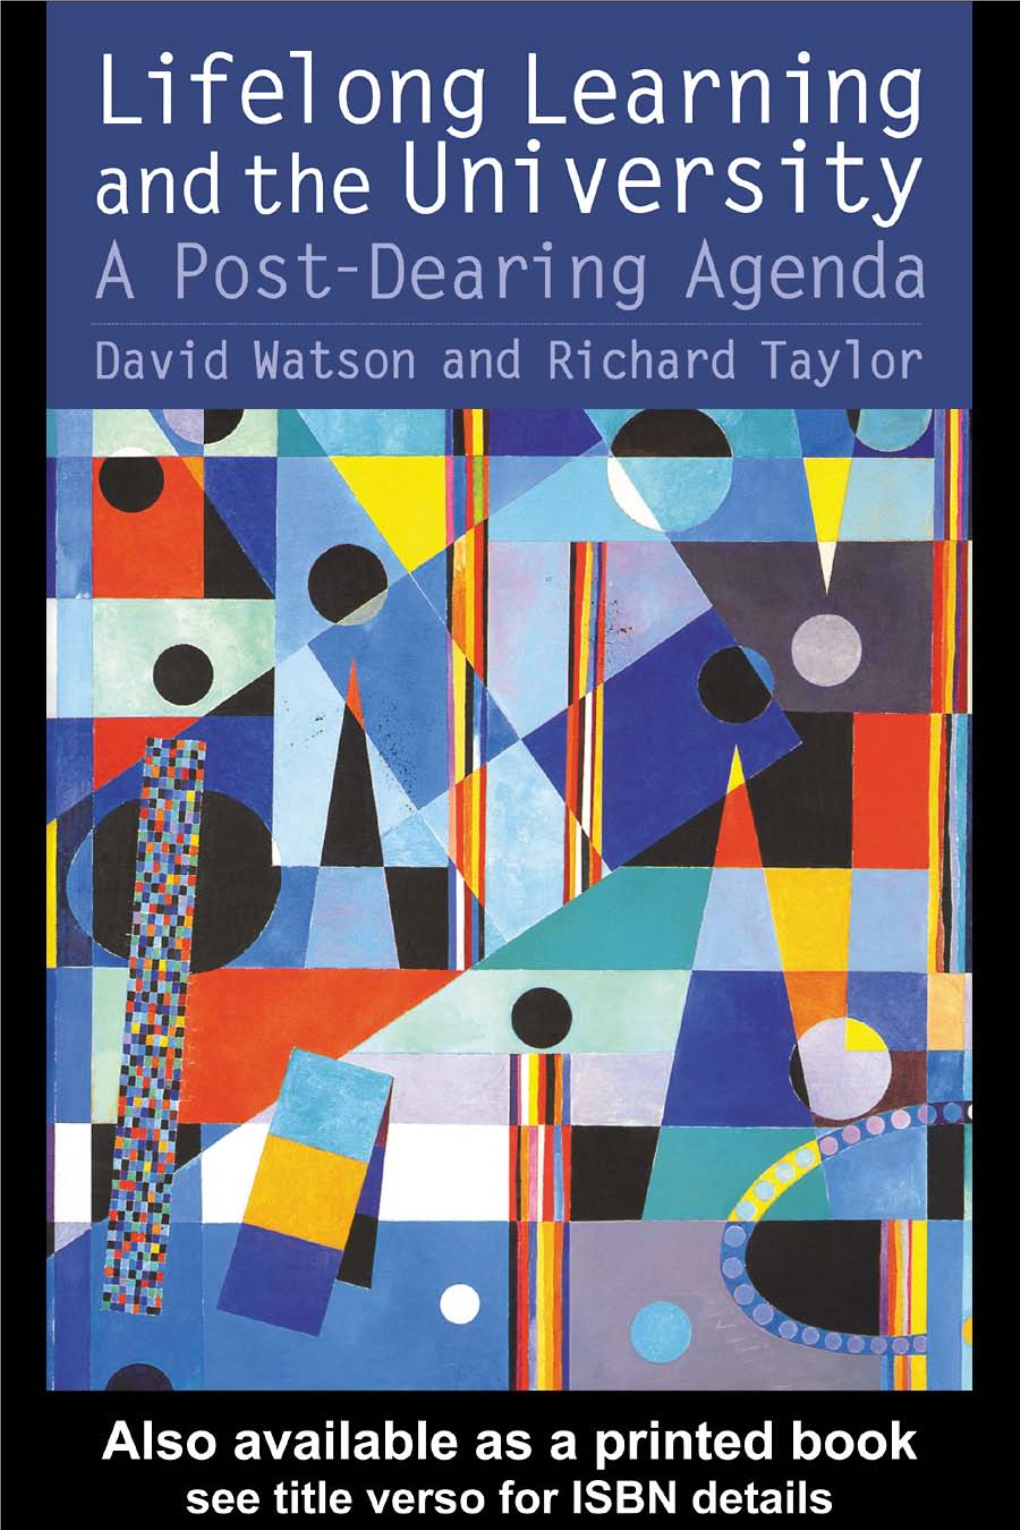 Lifelong Learning and the University: a Post-Dearing Agenda